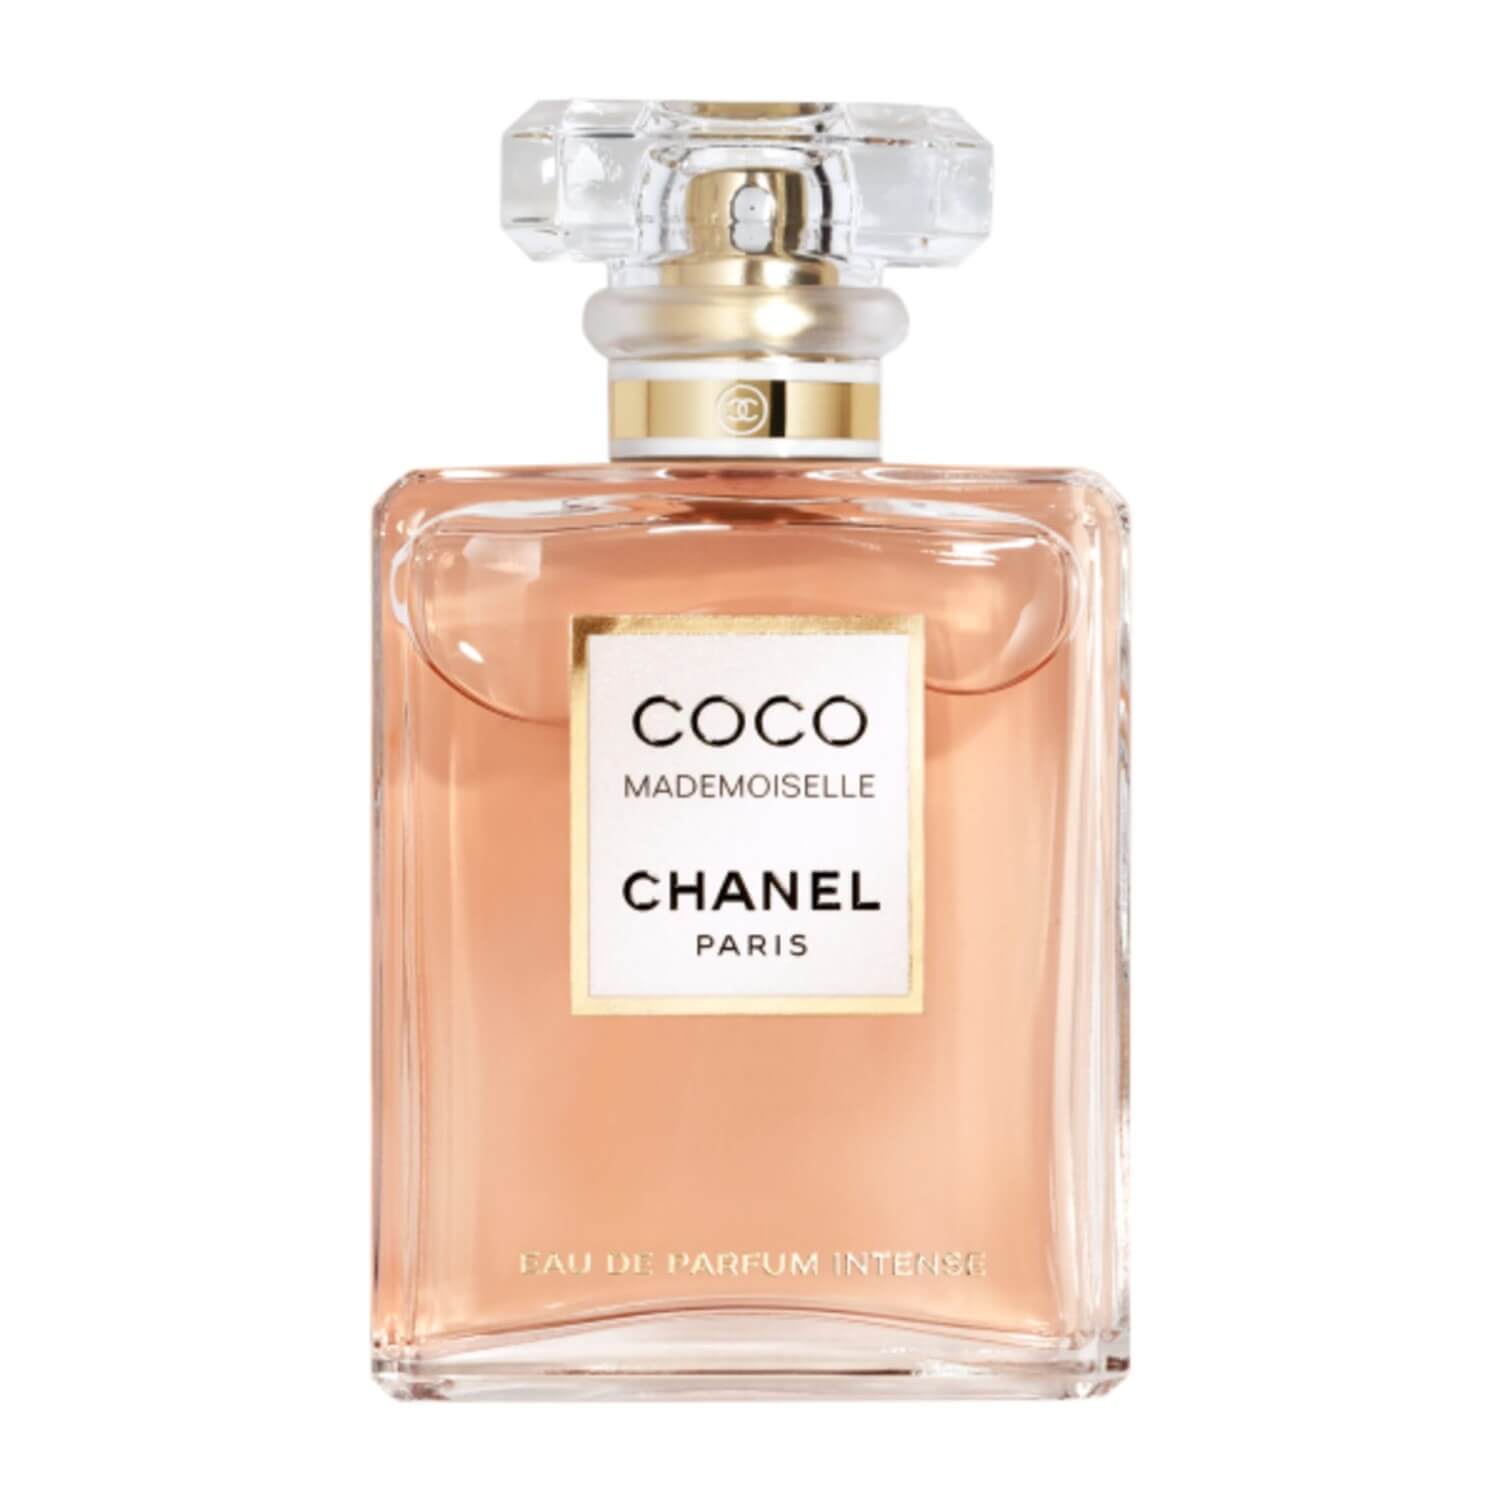 Chanel Coco Mademoiselle EDP Intense for Women